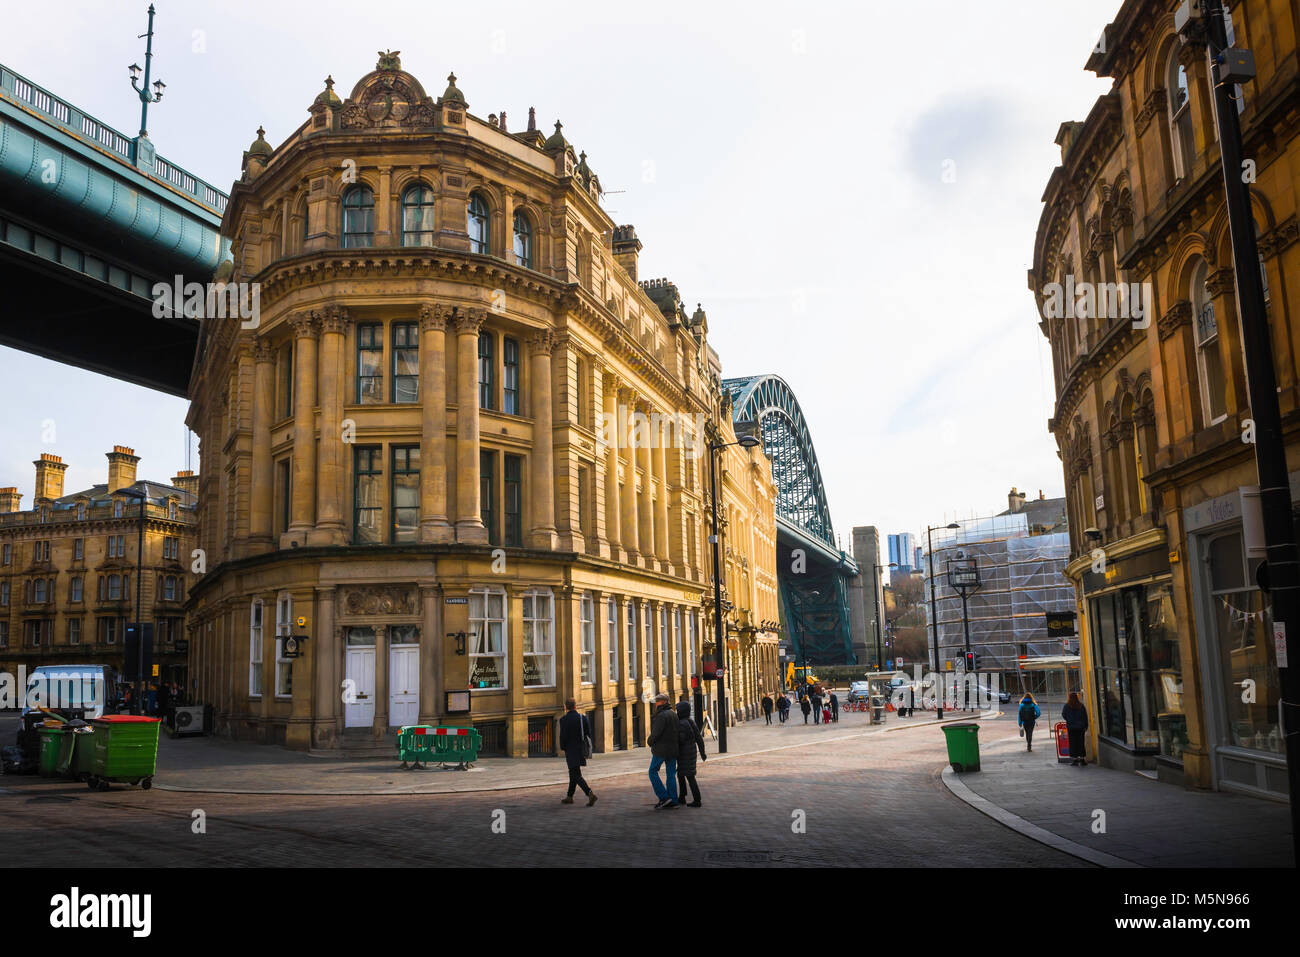 Newcastle Tyneside city, view of the neoclassical style Phoenix Apartments building in the old town Sandhill area of Newcastle upon Tyne,  England, UK Stock Photo